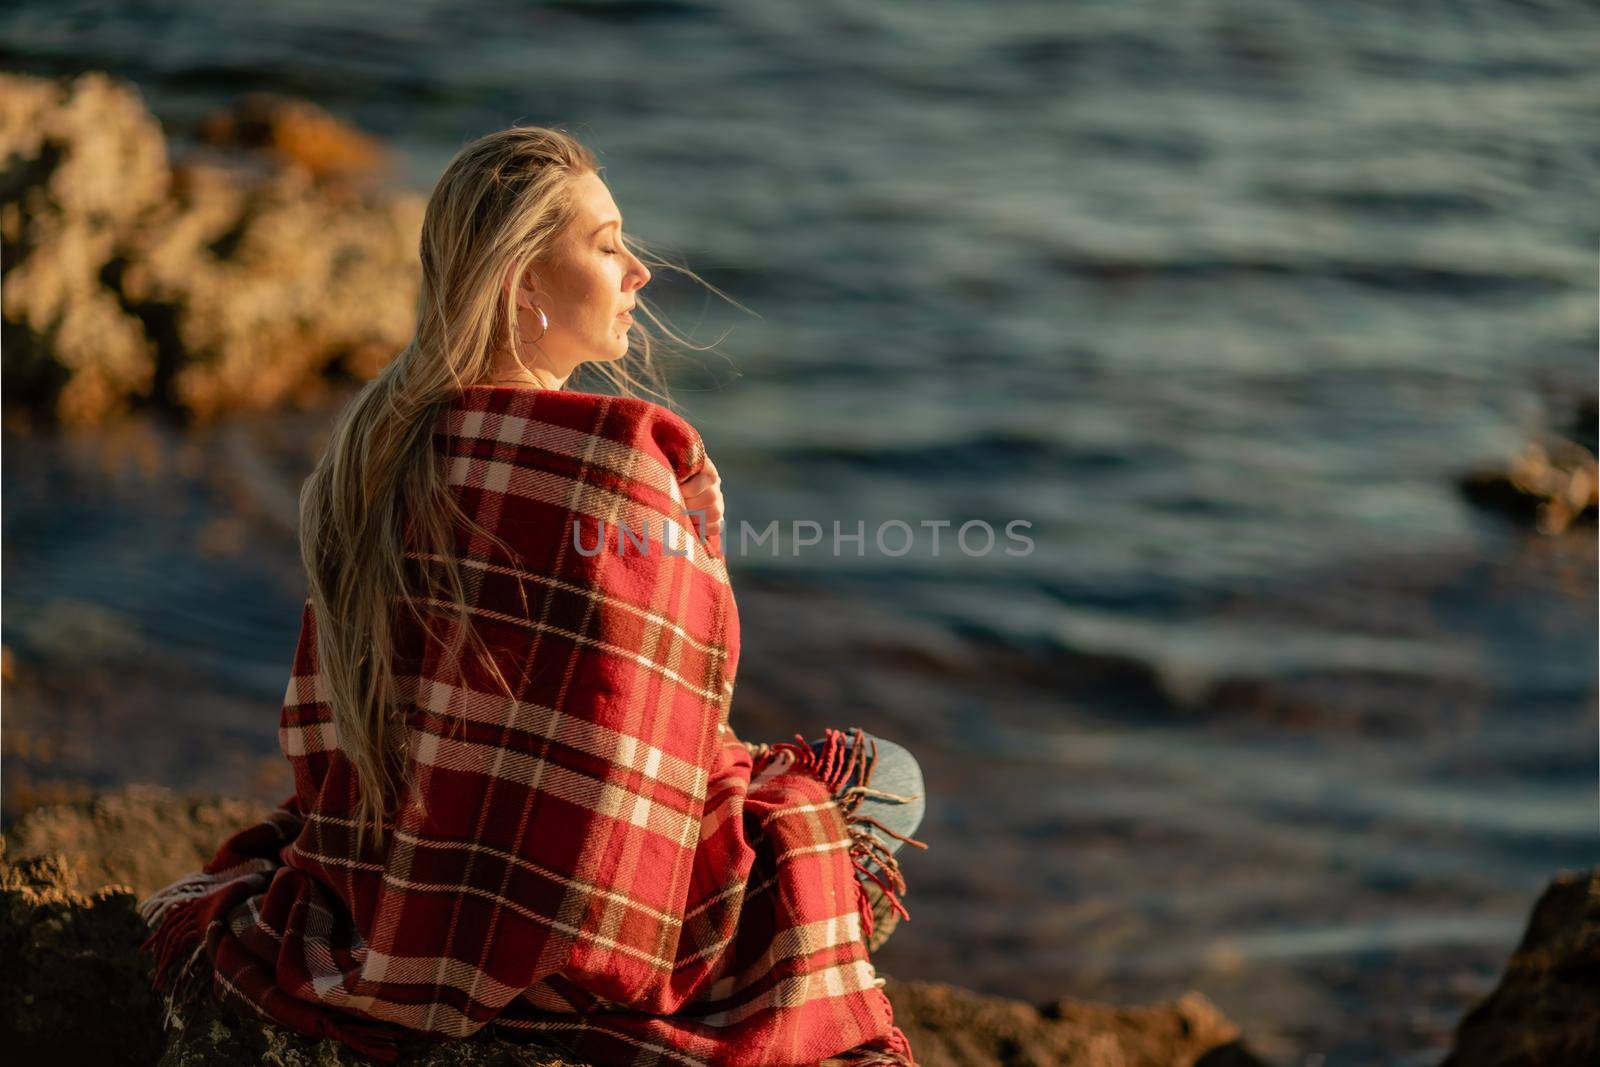 Attractive blonde Caucasian woman enjoying time on the beach at sunset, sitting in a blanket and looking to the side, with the sunset sky and sea in the background. Beach vacation